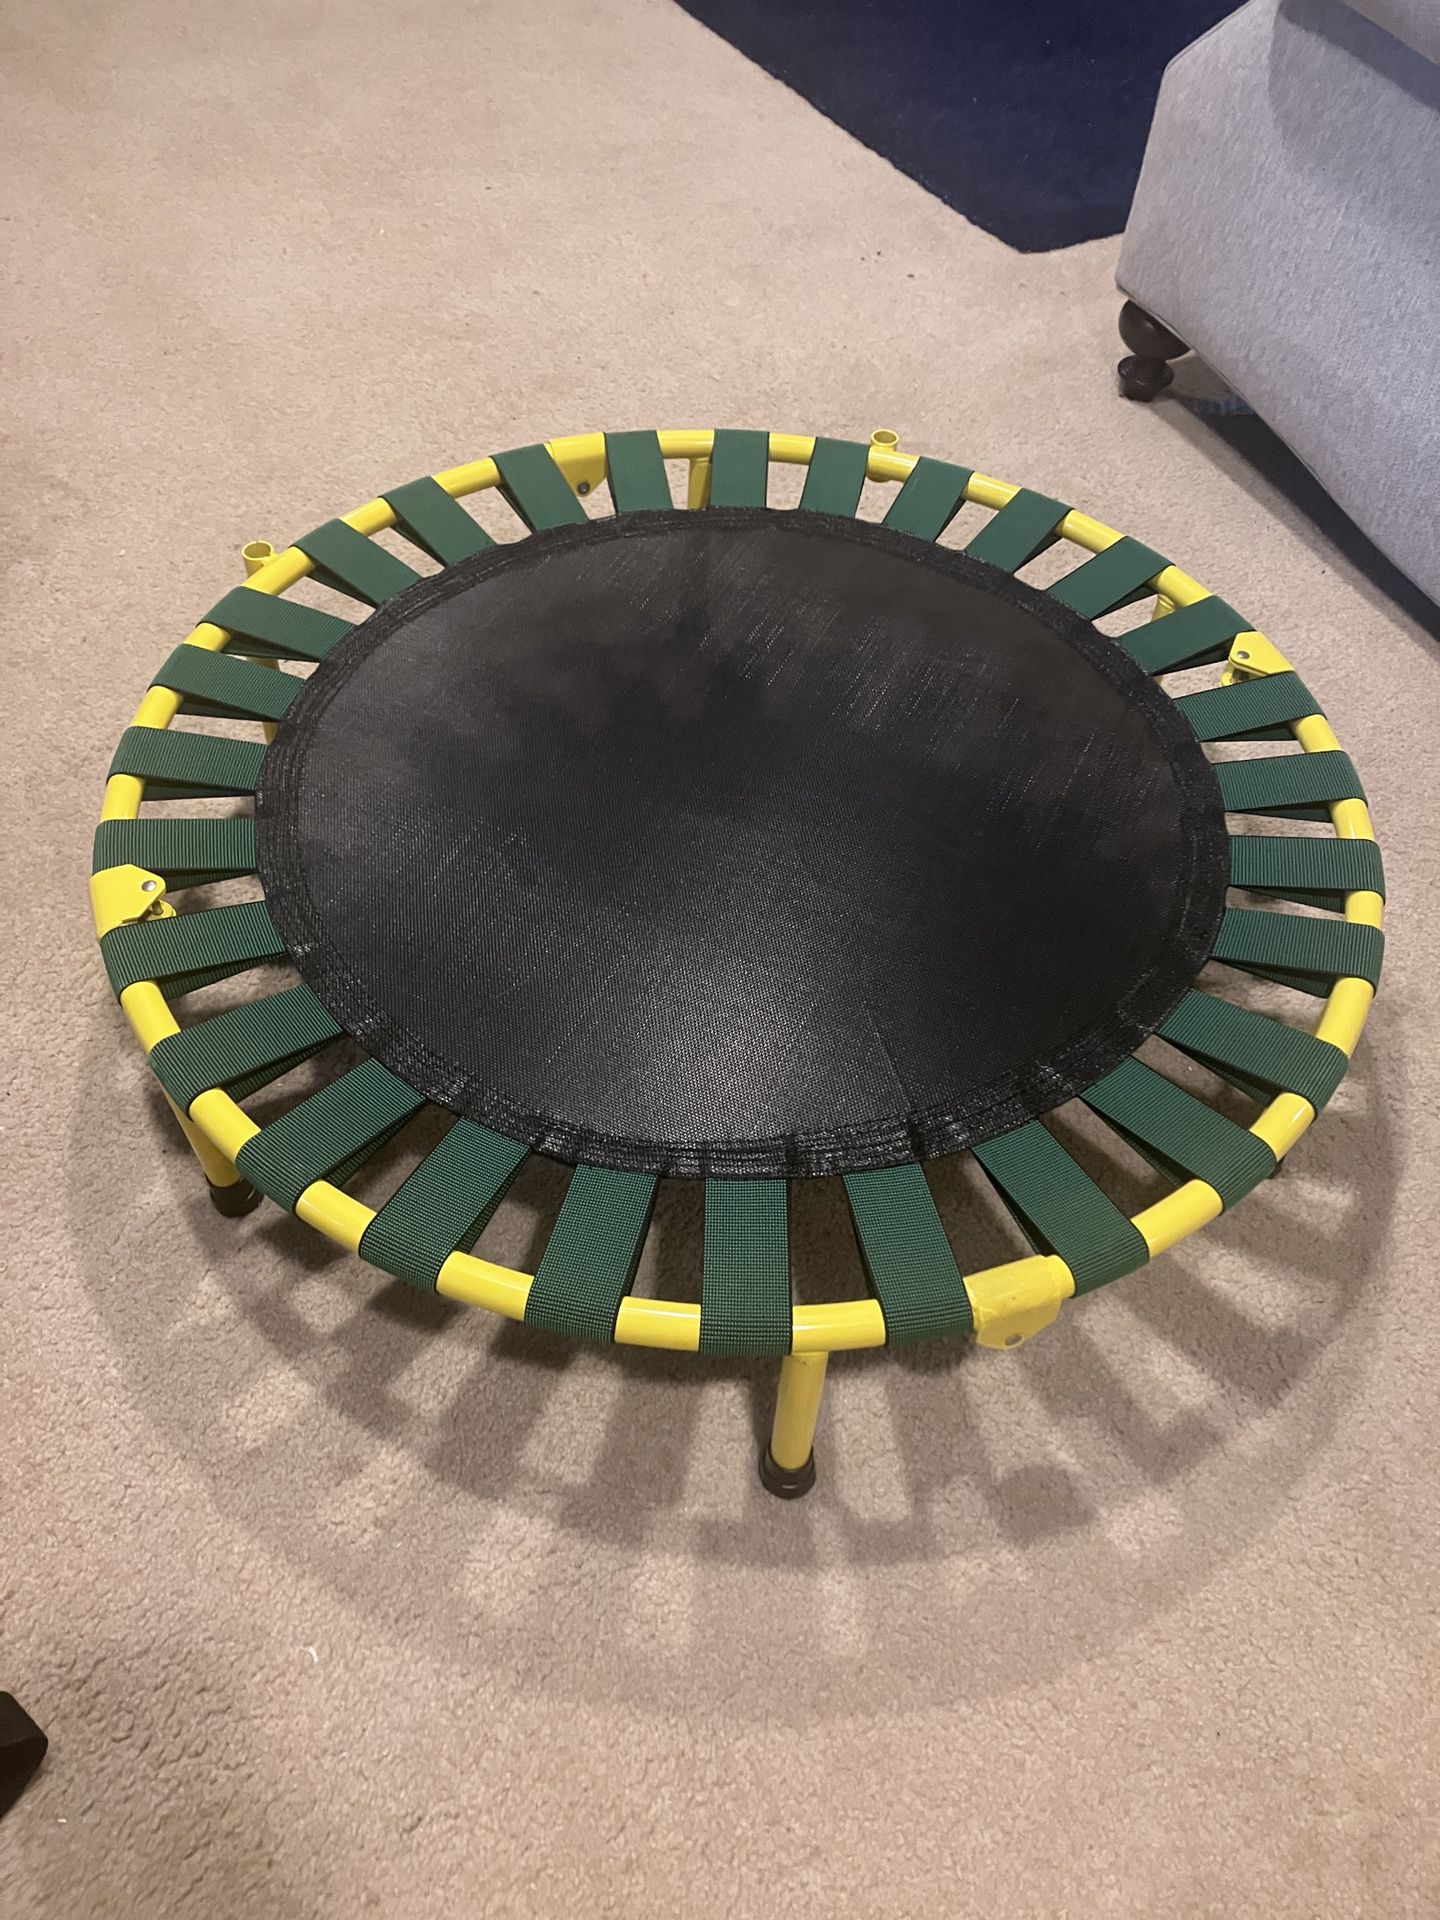 Childs Trampoline With Handle